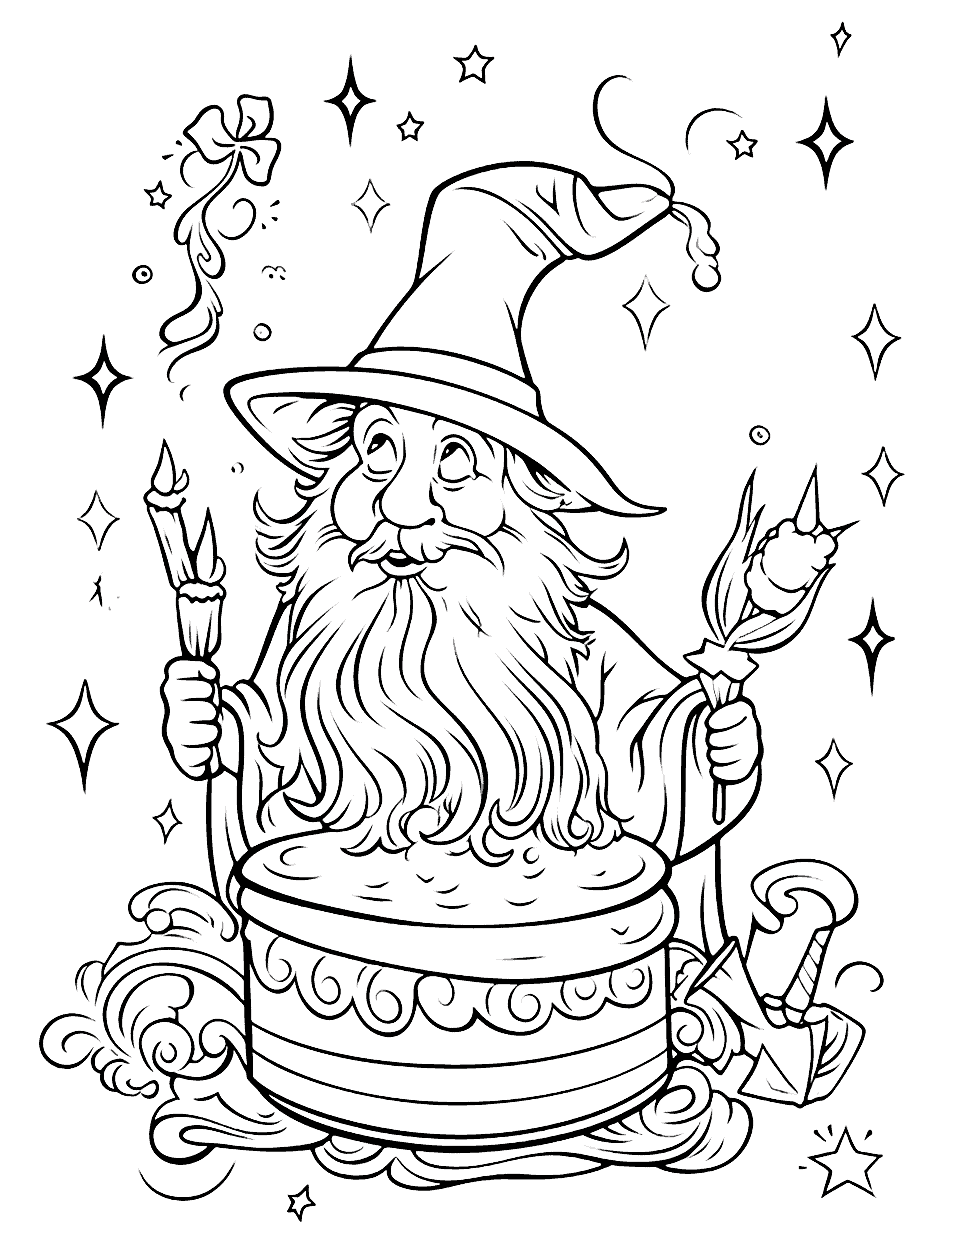 Wizard's Magic Birthday Happy Coloring Page - A wizard casting a spell to make a birthday cake appear.